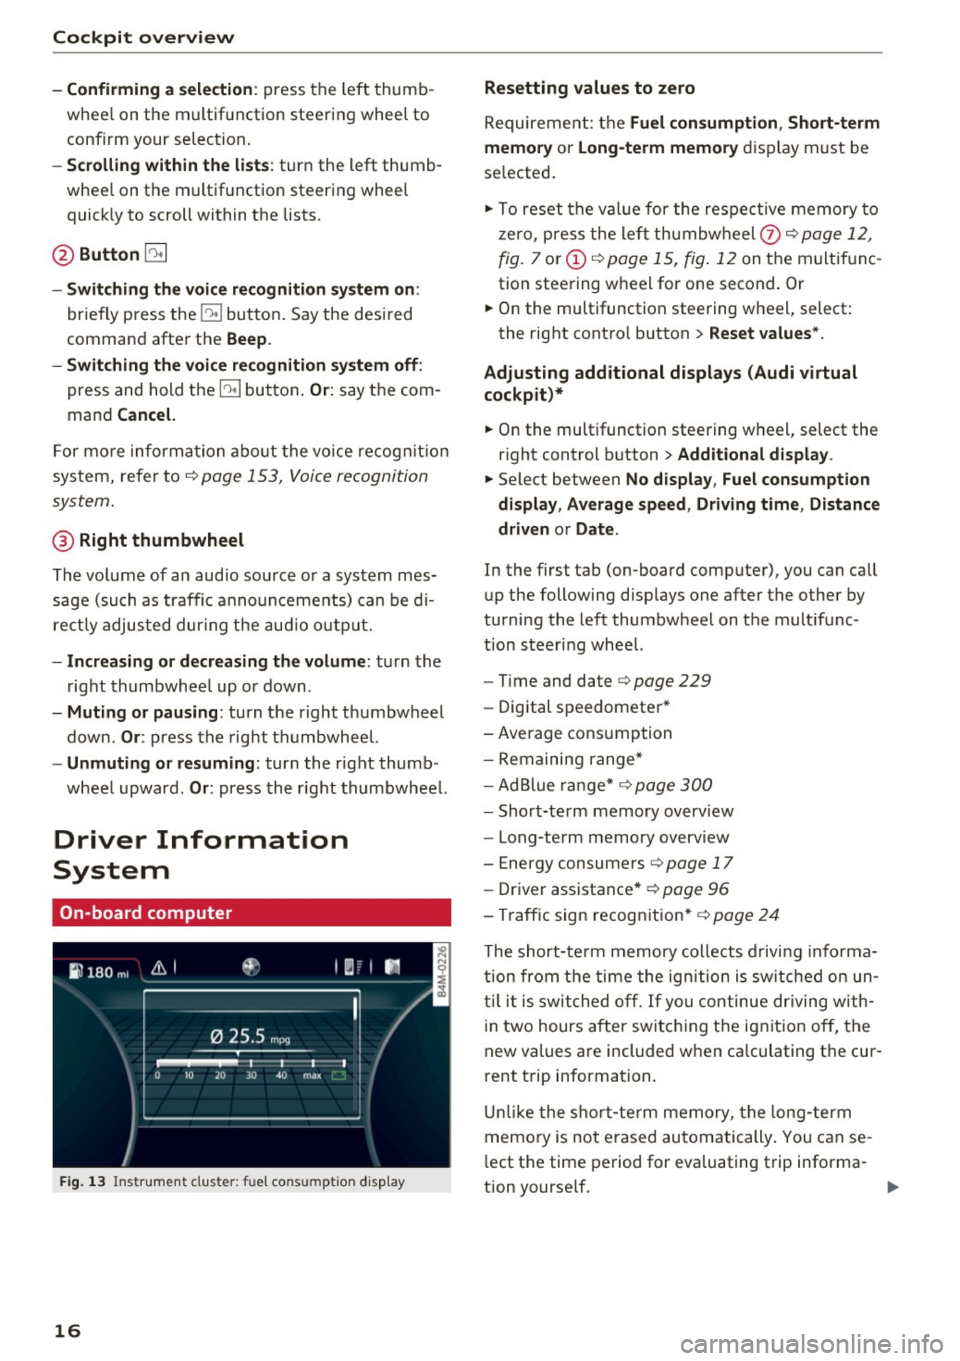 AUDI A4 2017 User Guide Cockpit  overview 
- Confirming  a  selection: 
press  the left  thumb ­
whee l on  the  multif unction  steering  wheel  to 
confirm  your  selection . 
-Scrolling  within  the  lists: turn  the  le